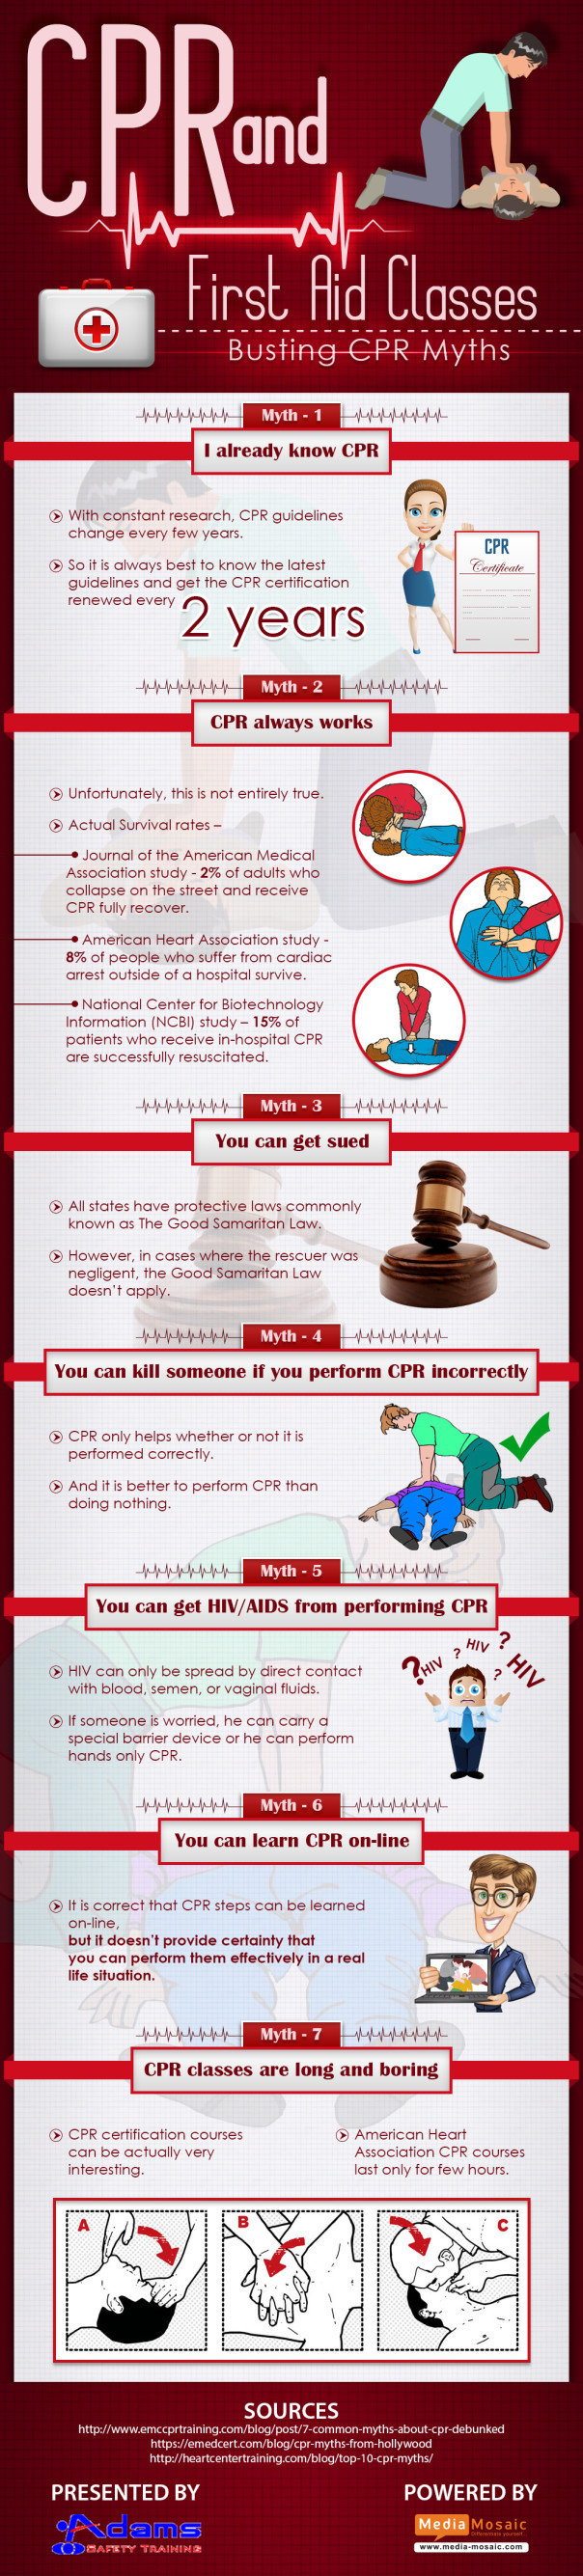 7 CPR Myths and their explanations